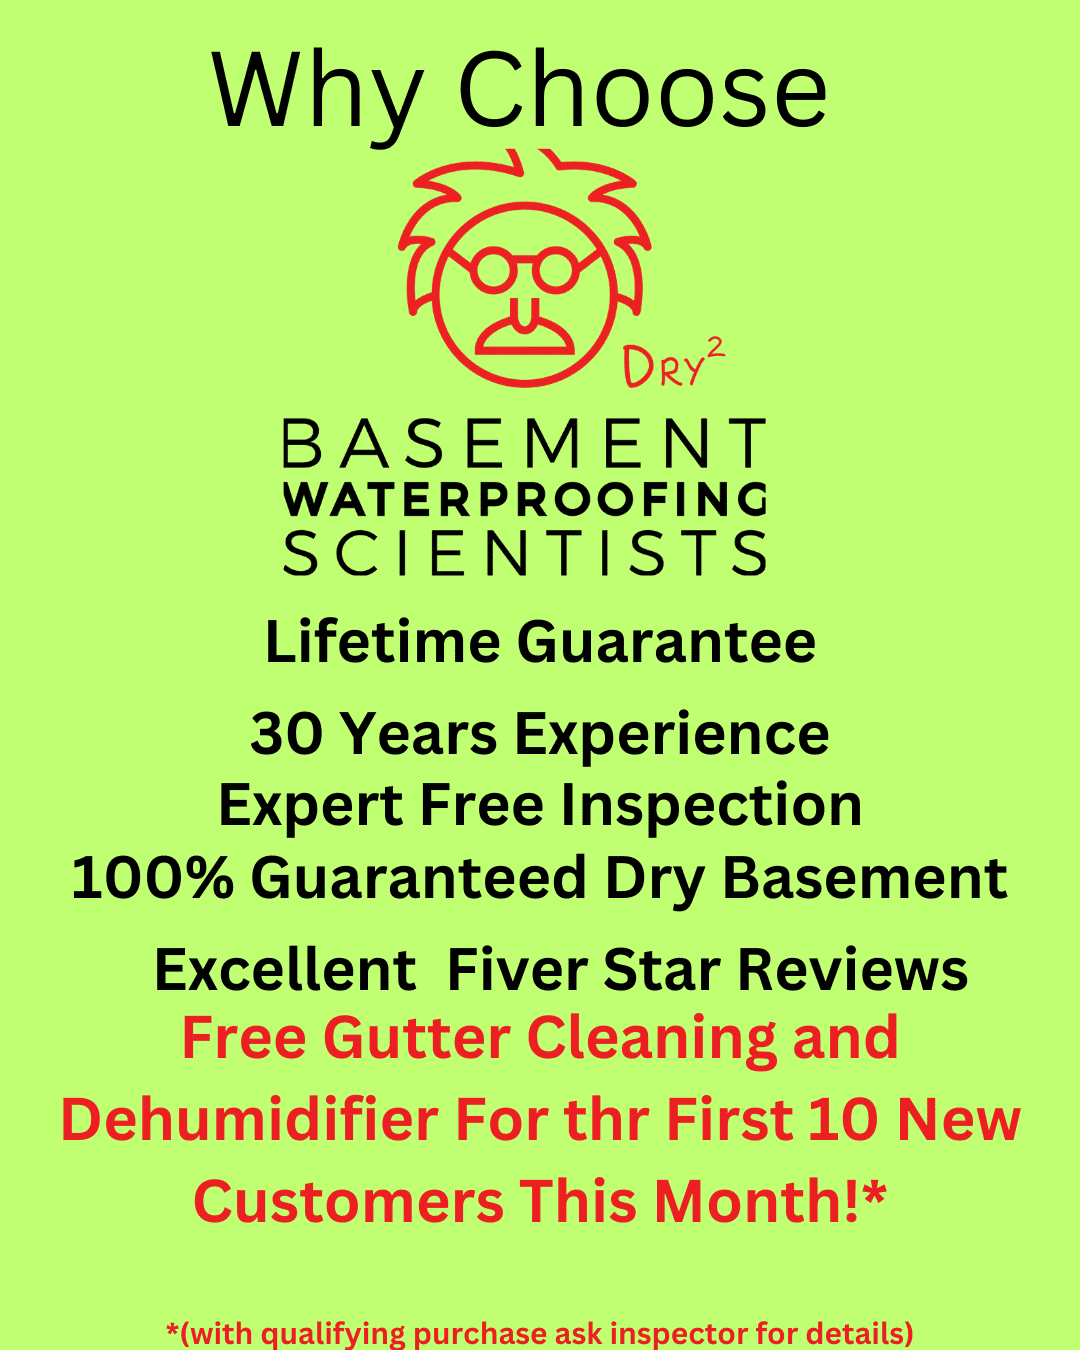 Basement Waterproofing Specialists in PA the Scientists